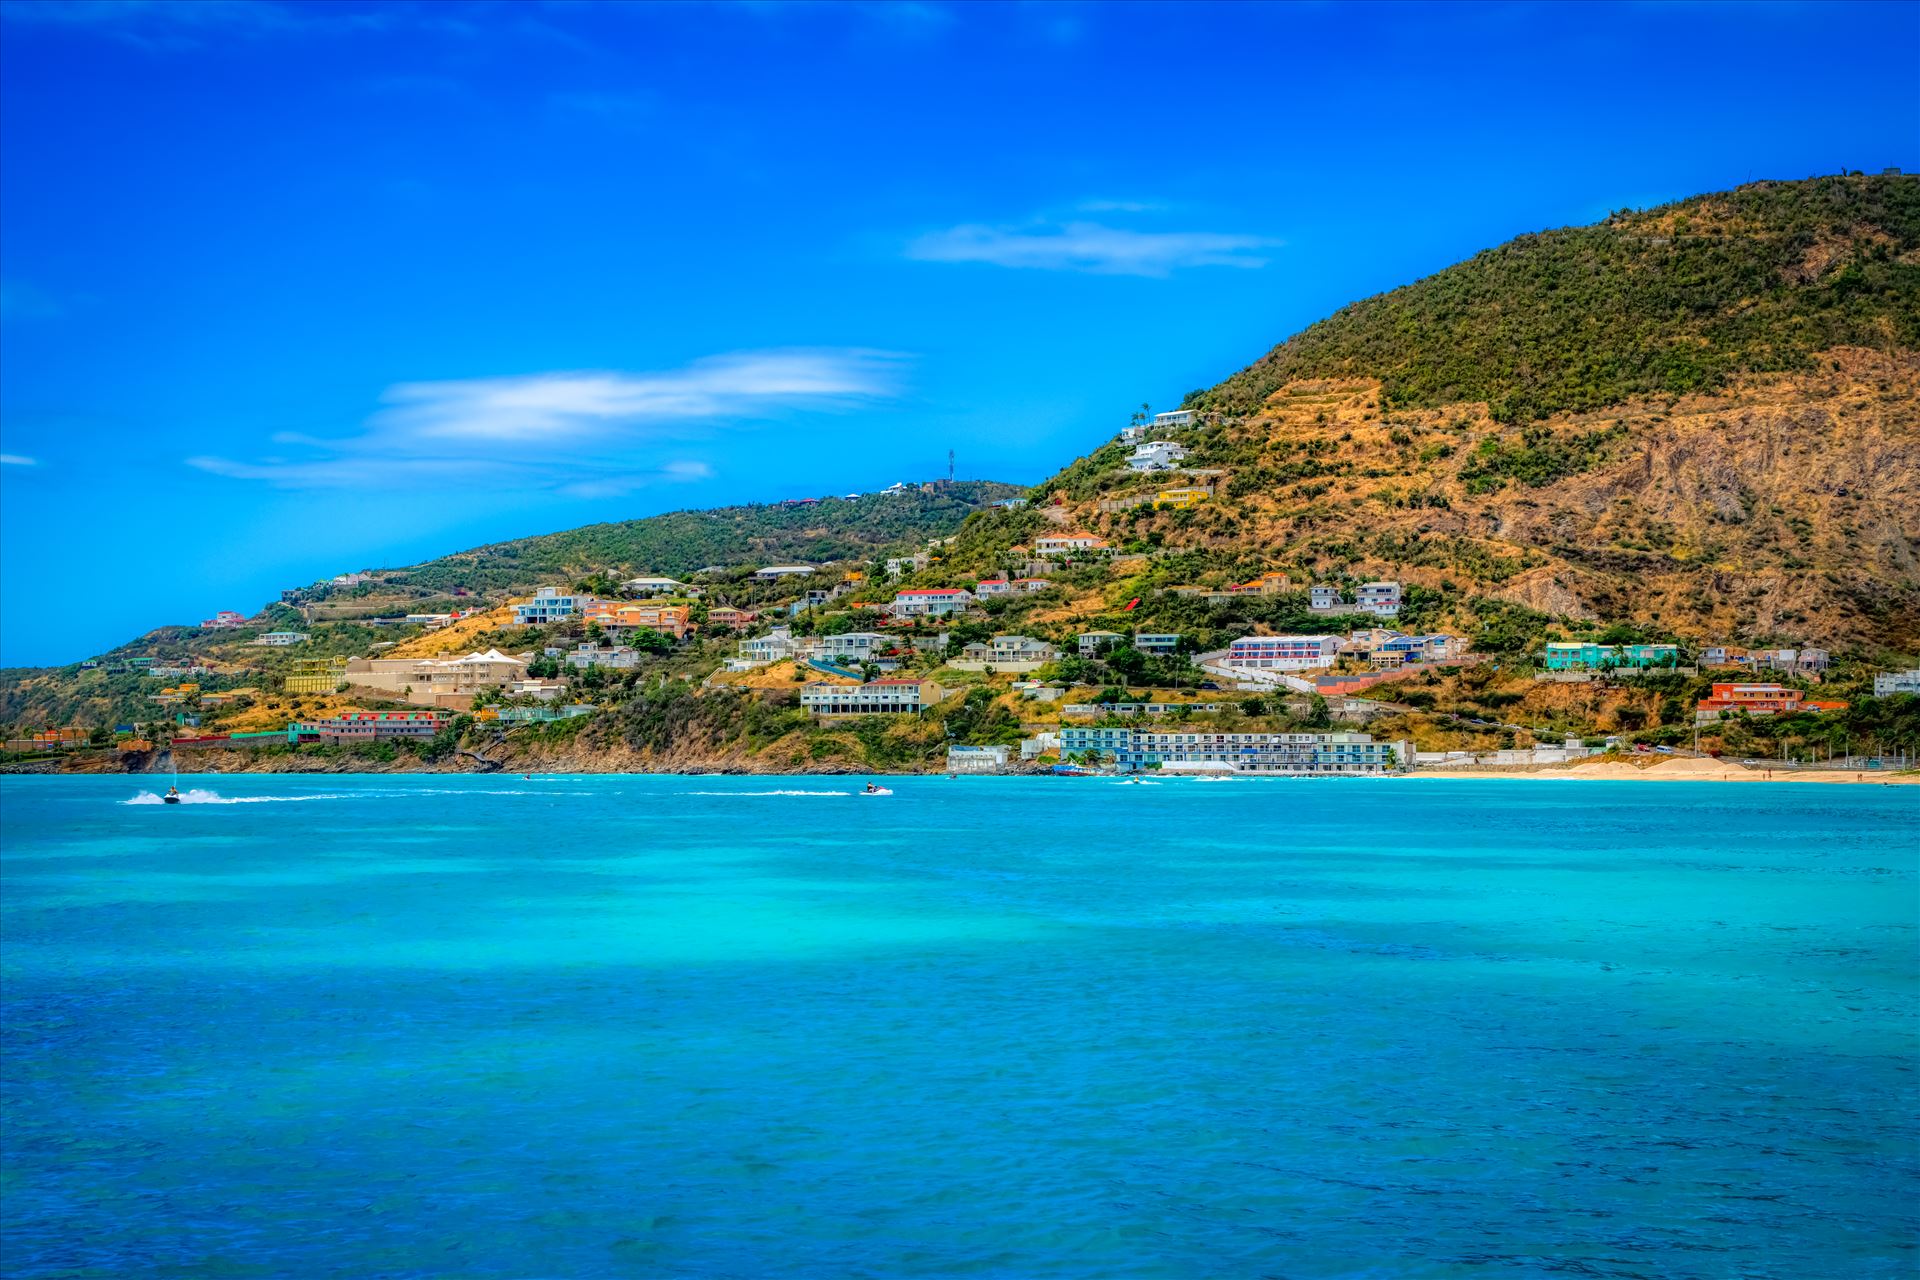 St. Maarten - The city of St. Maarten on St. Martin by Terry Kelly Photography